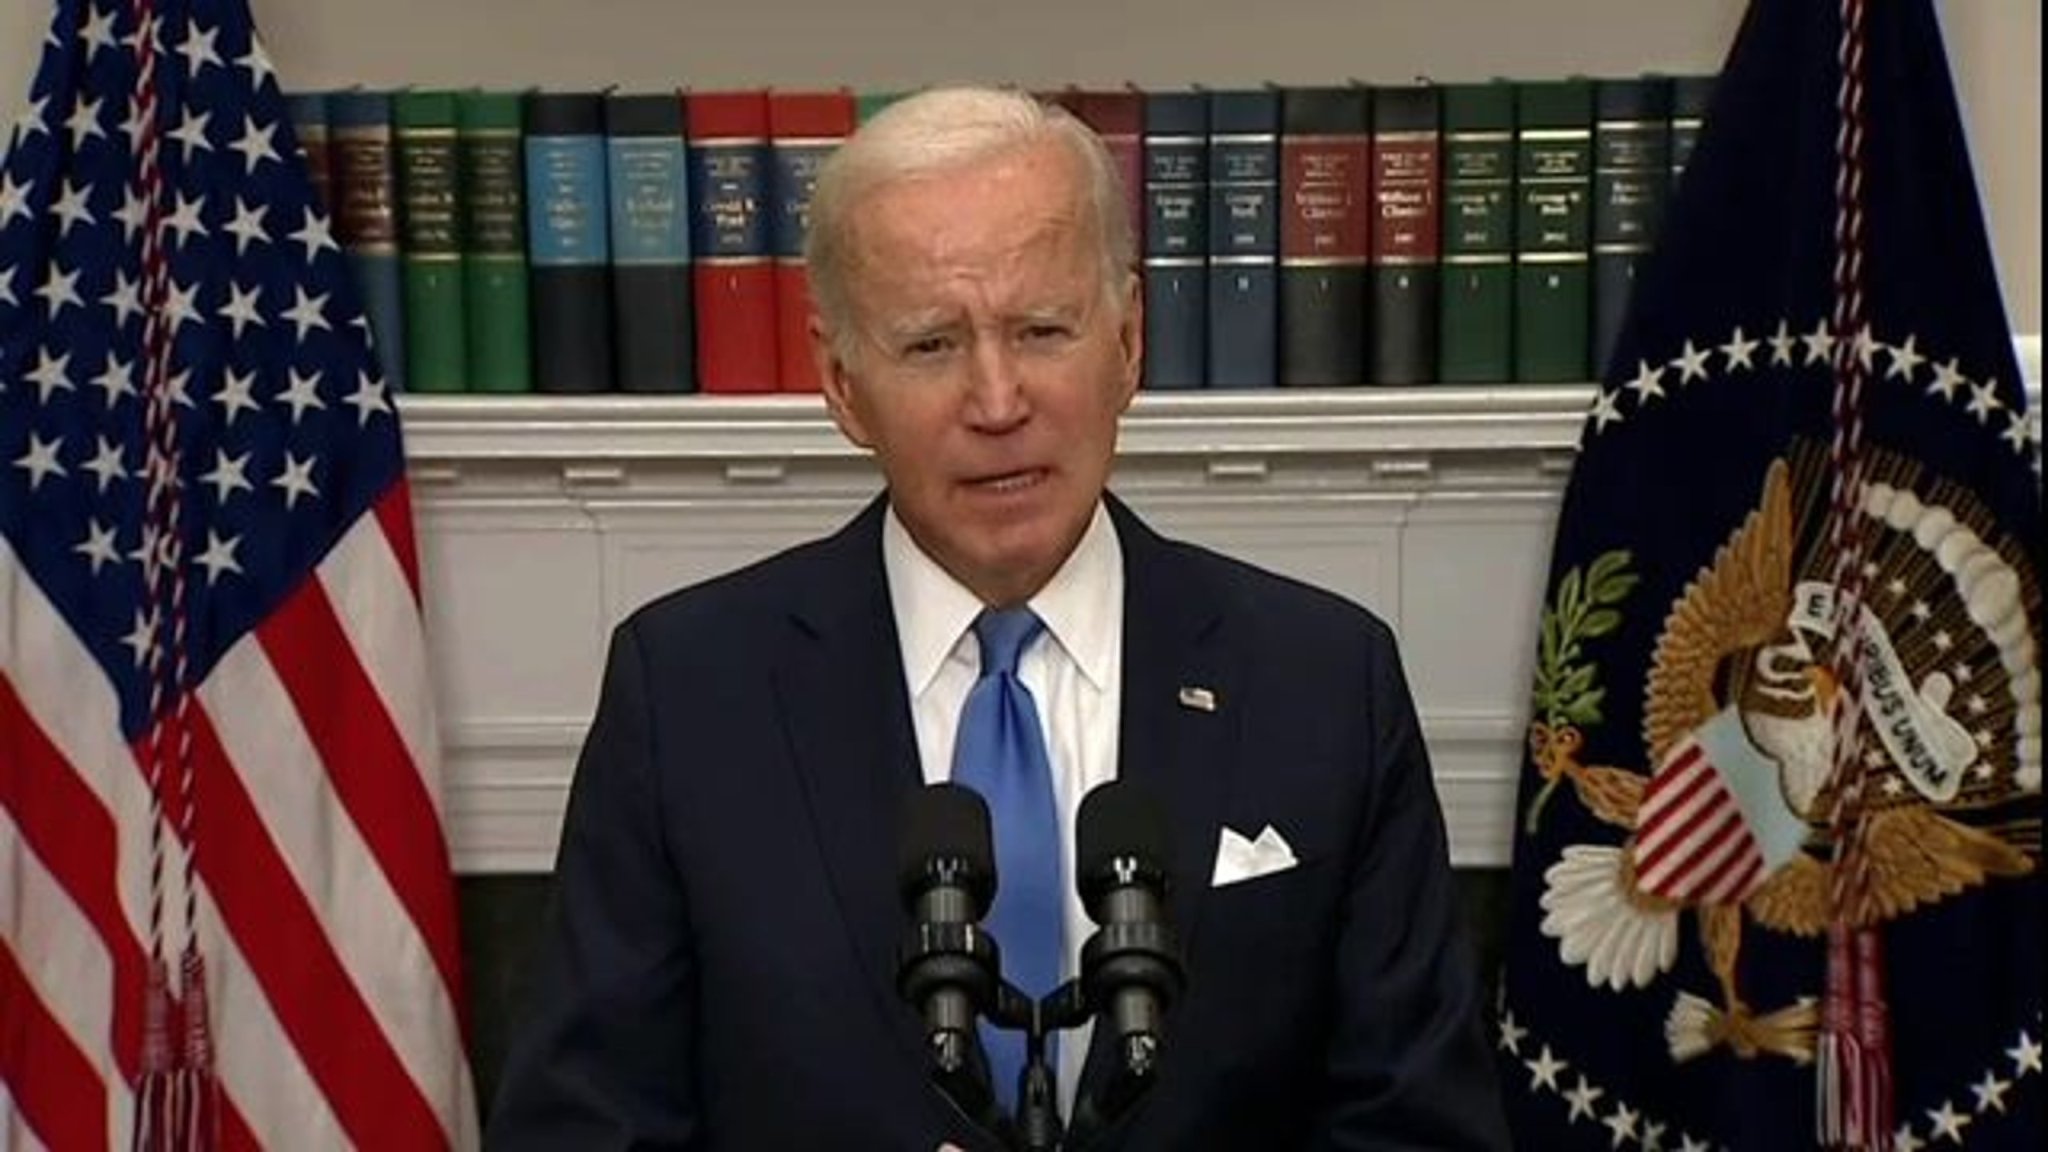 President Biden says Hurricane Ian's impact on Florida "is likely to rank among the worst in the nation's history."